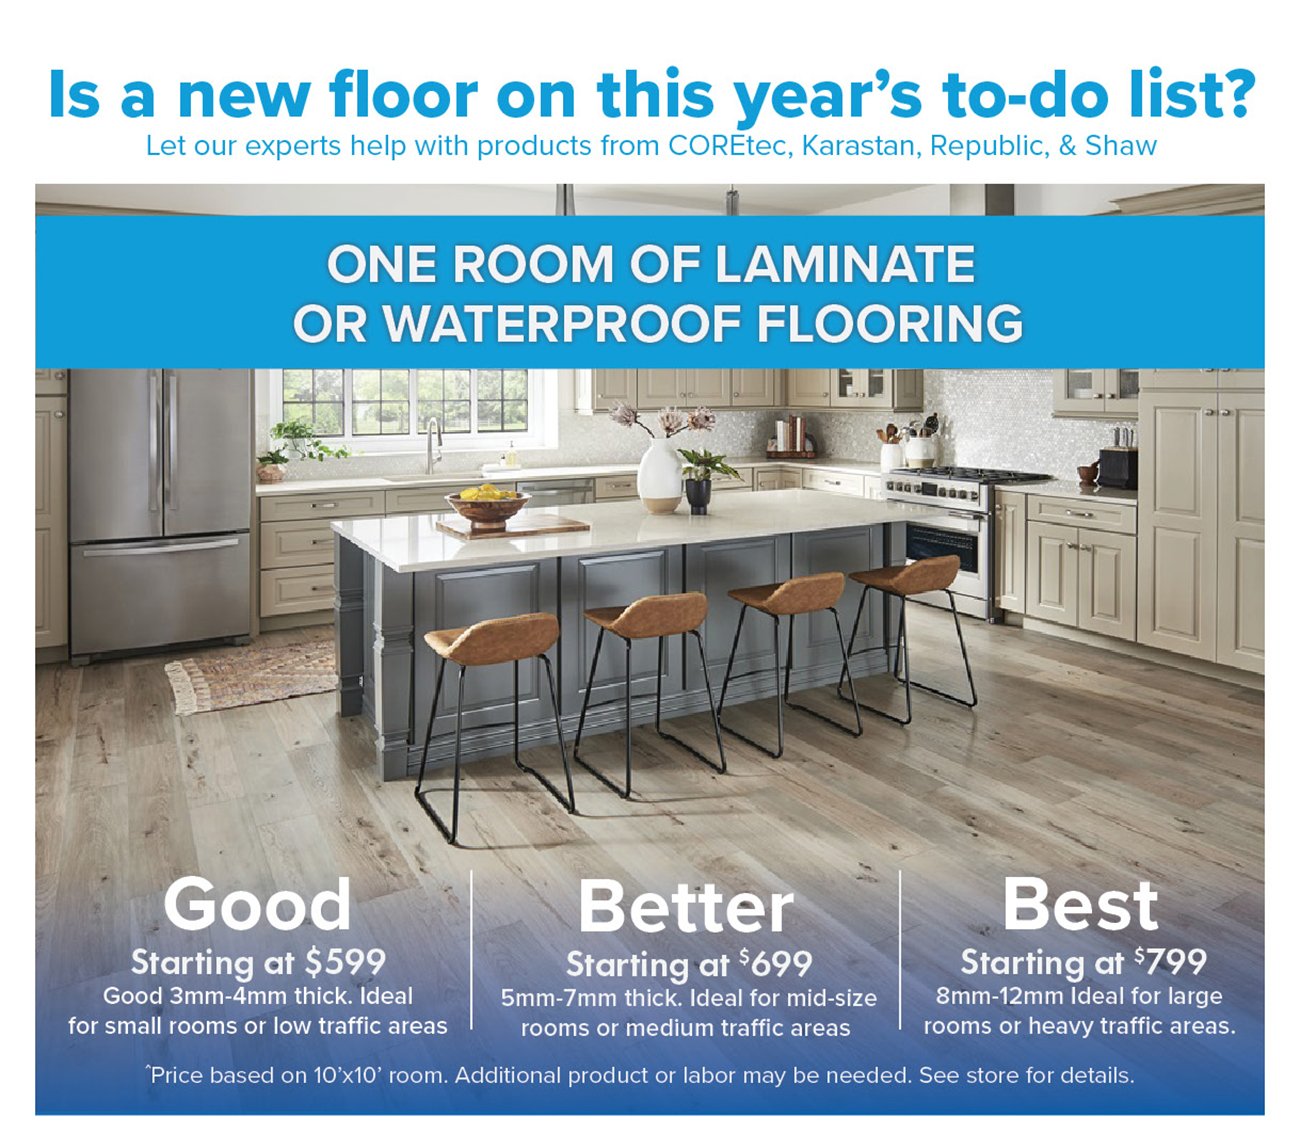 Is a new floor on this years to-do list? Let our experts help with products from COREtec, Karastan, Republic, Shaw ONE ROOM OF LAMINATE 0 3 WATERPROOF FLOORING Best Starting at $599 Starting at *699 Starting at 799 Good 3mm-4mm thick. Ideal 5mm-7mm thick. Ideal for mid-size 8mm-12mm Ideal for large for small rooms or low traffic areas rooms or medium traffic areas rooms or heavy traffic areas. Price based on 10x10 room. Additional product or labor may be needed. See store for details. 